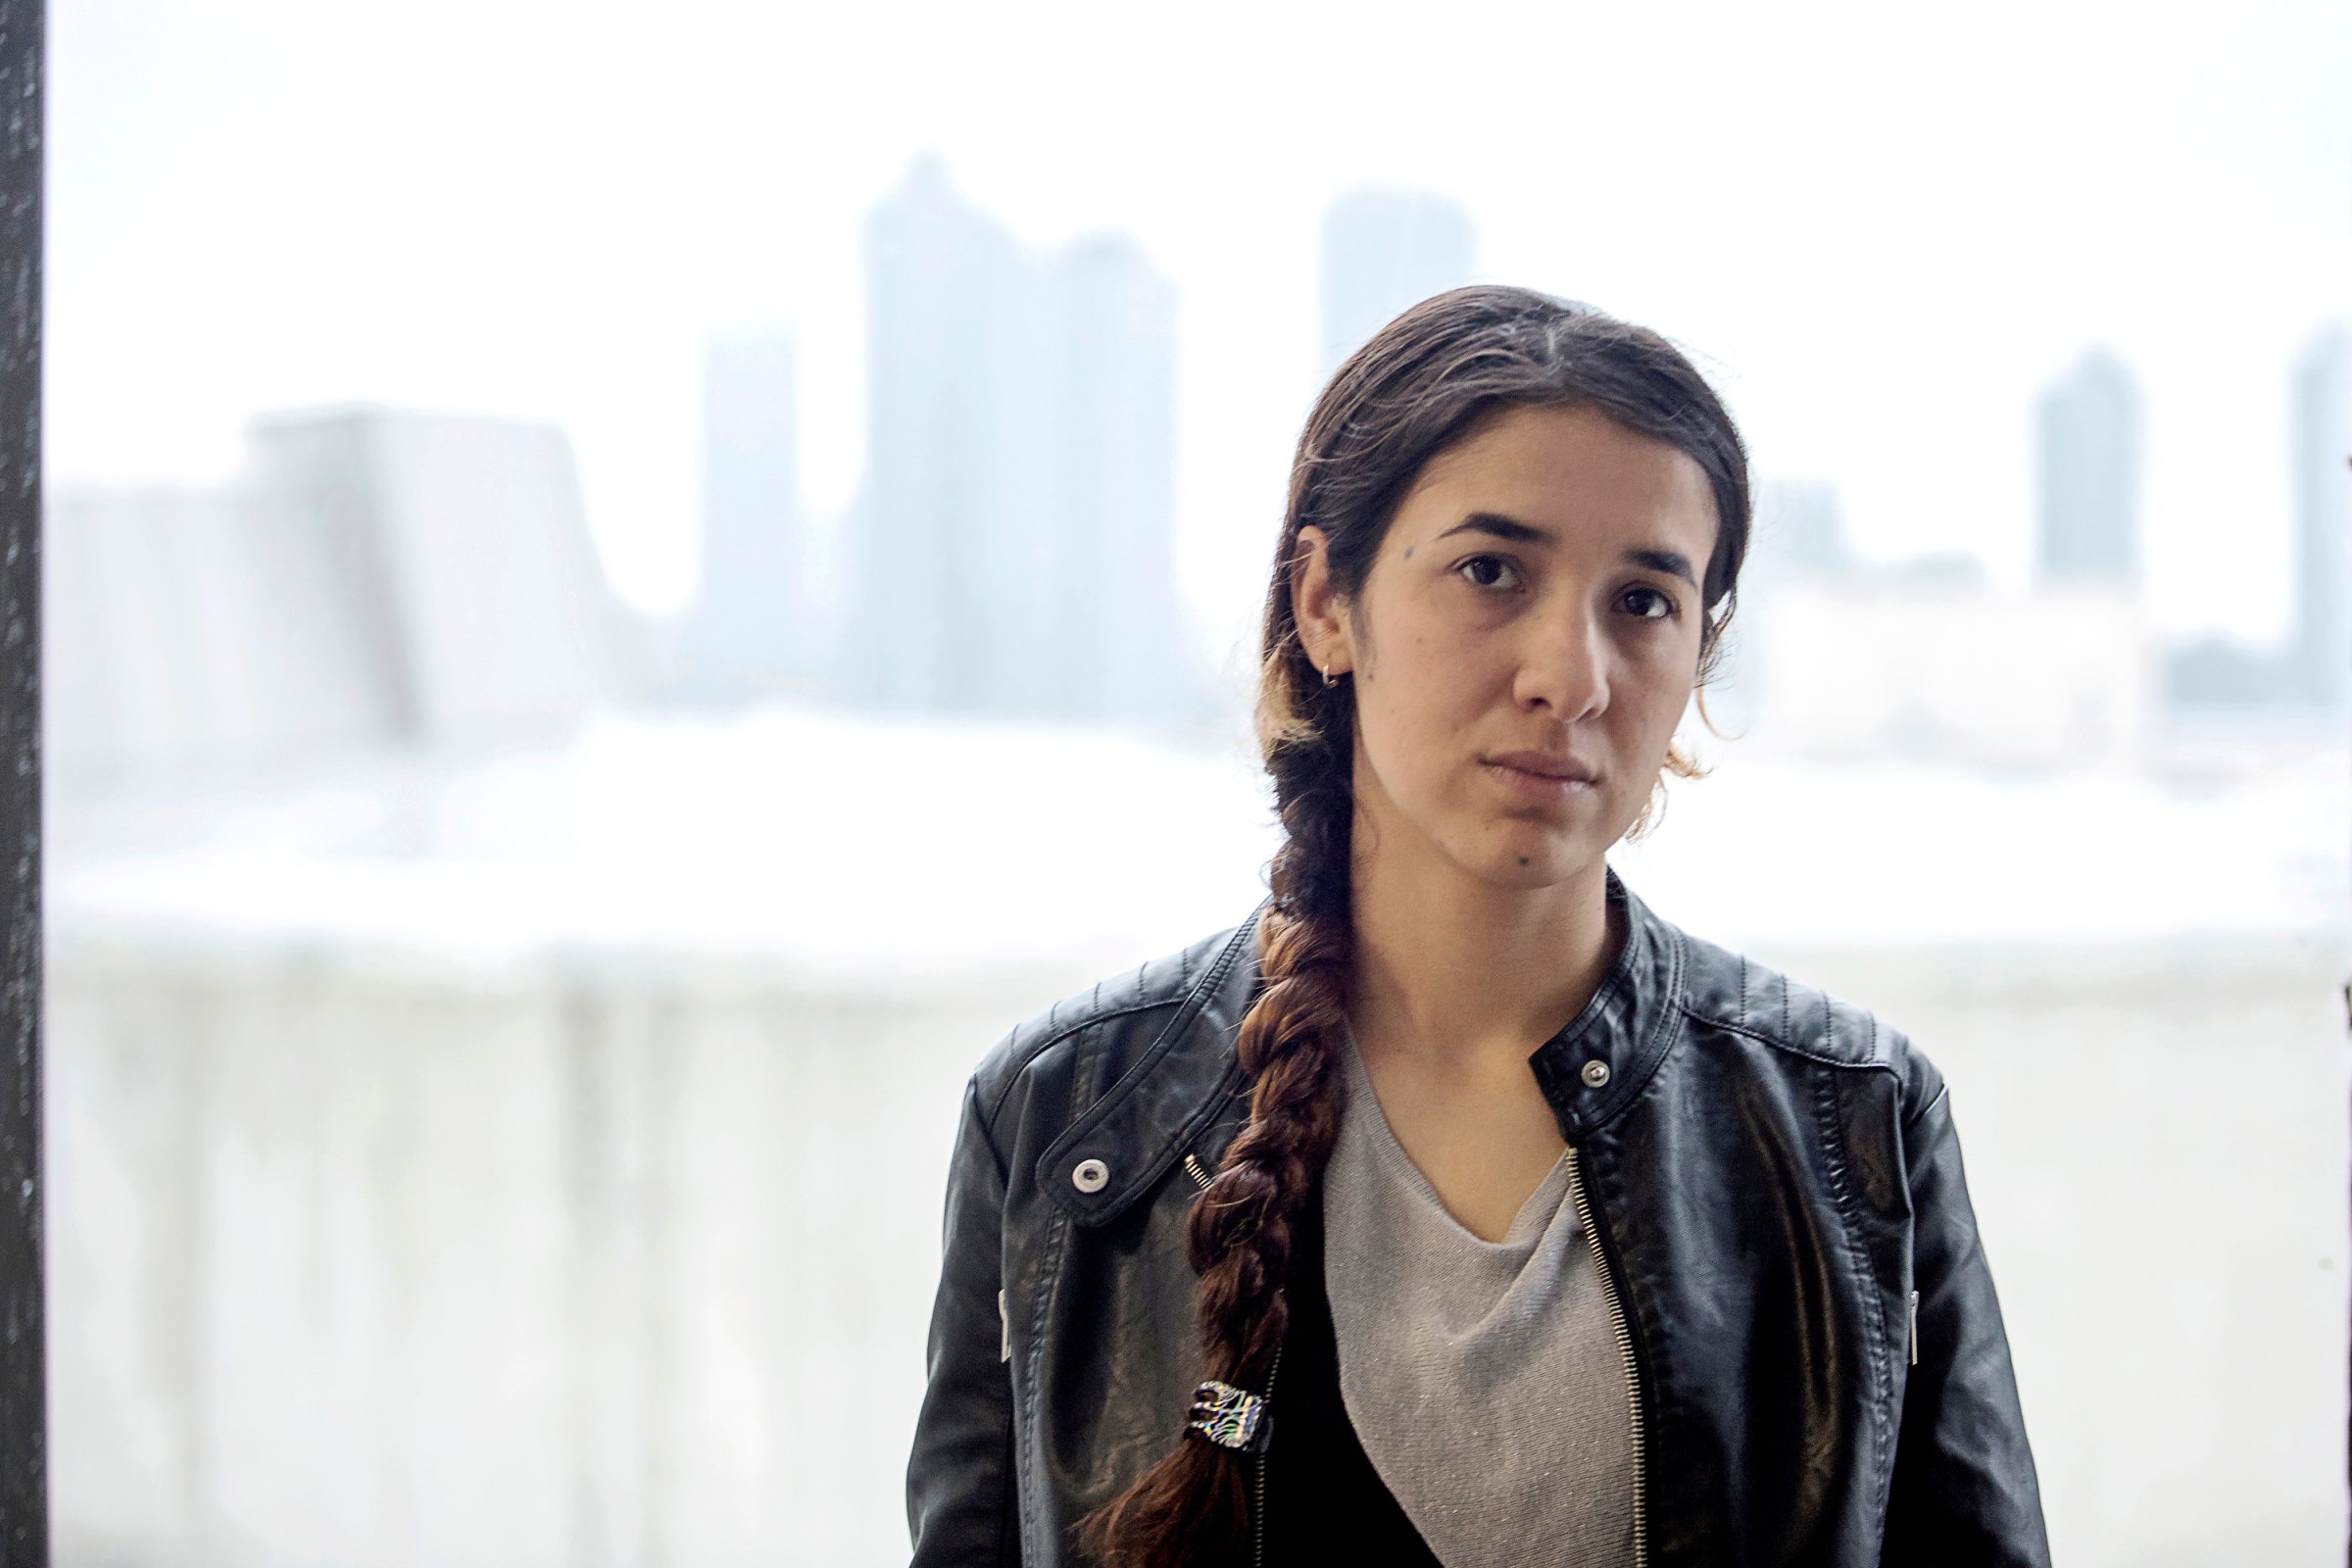 Nadia, a young Iraqi Yazidi who was abducted into slavery by members of ISIS, is photographed in the U.S.